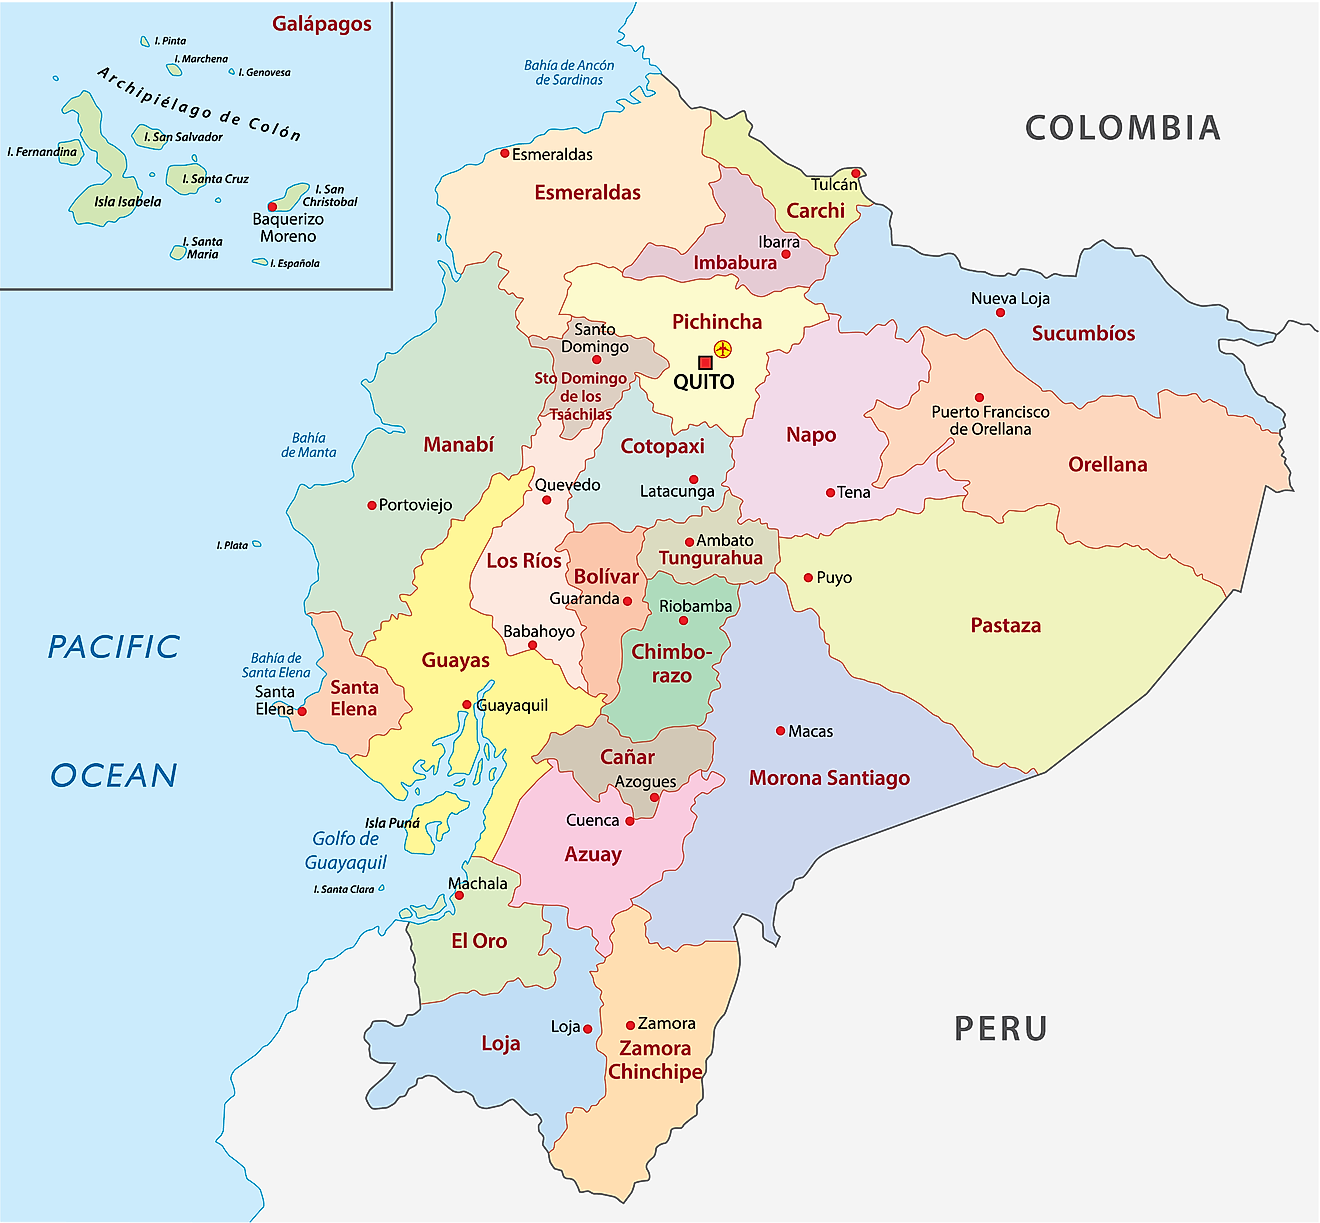 Political Map of Ecuador showing its 24 provinces and the capital city of Quito